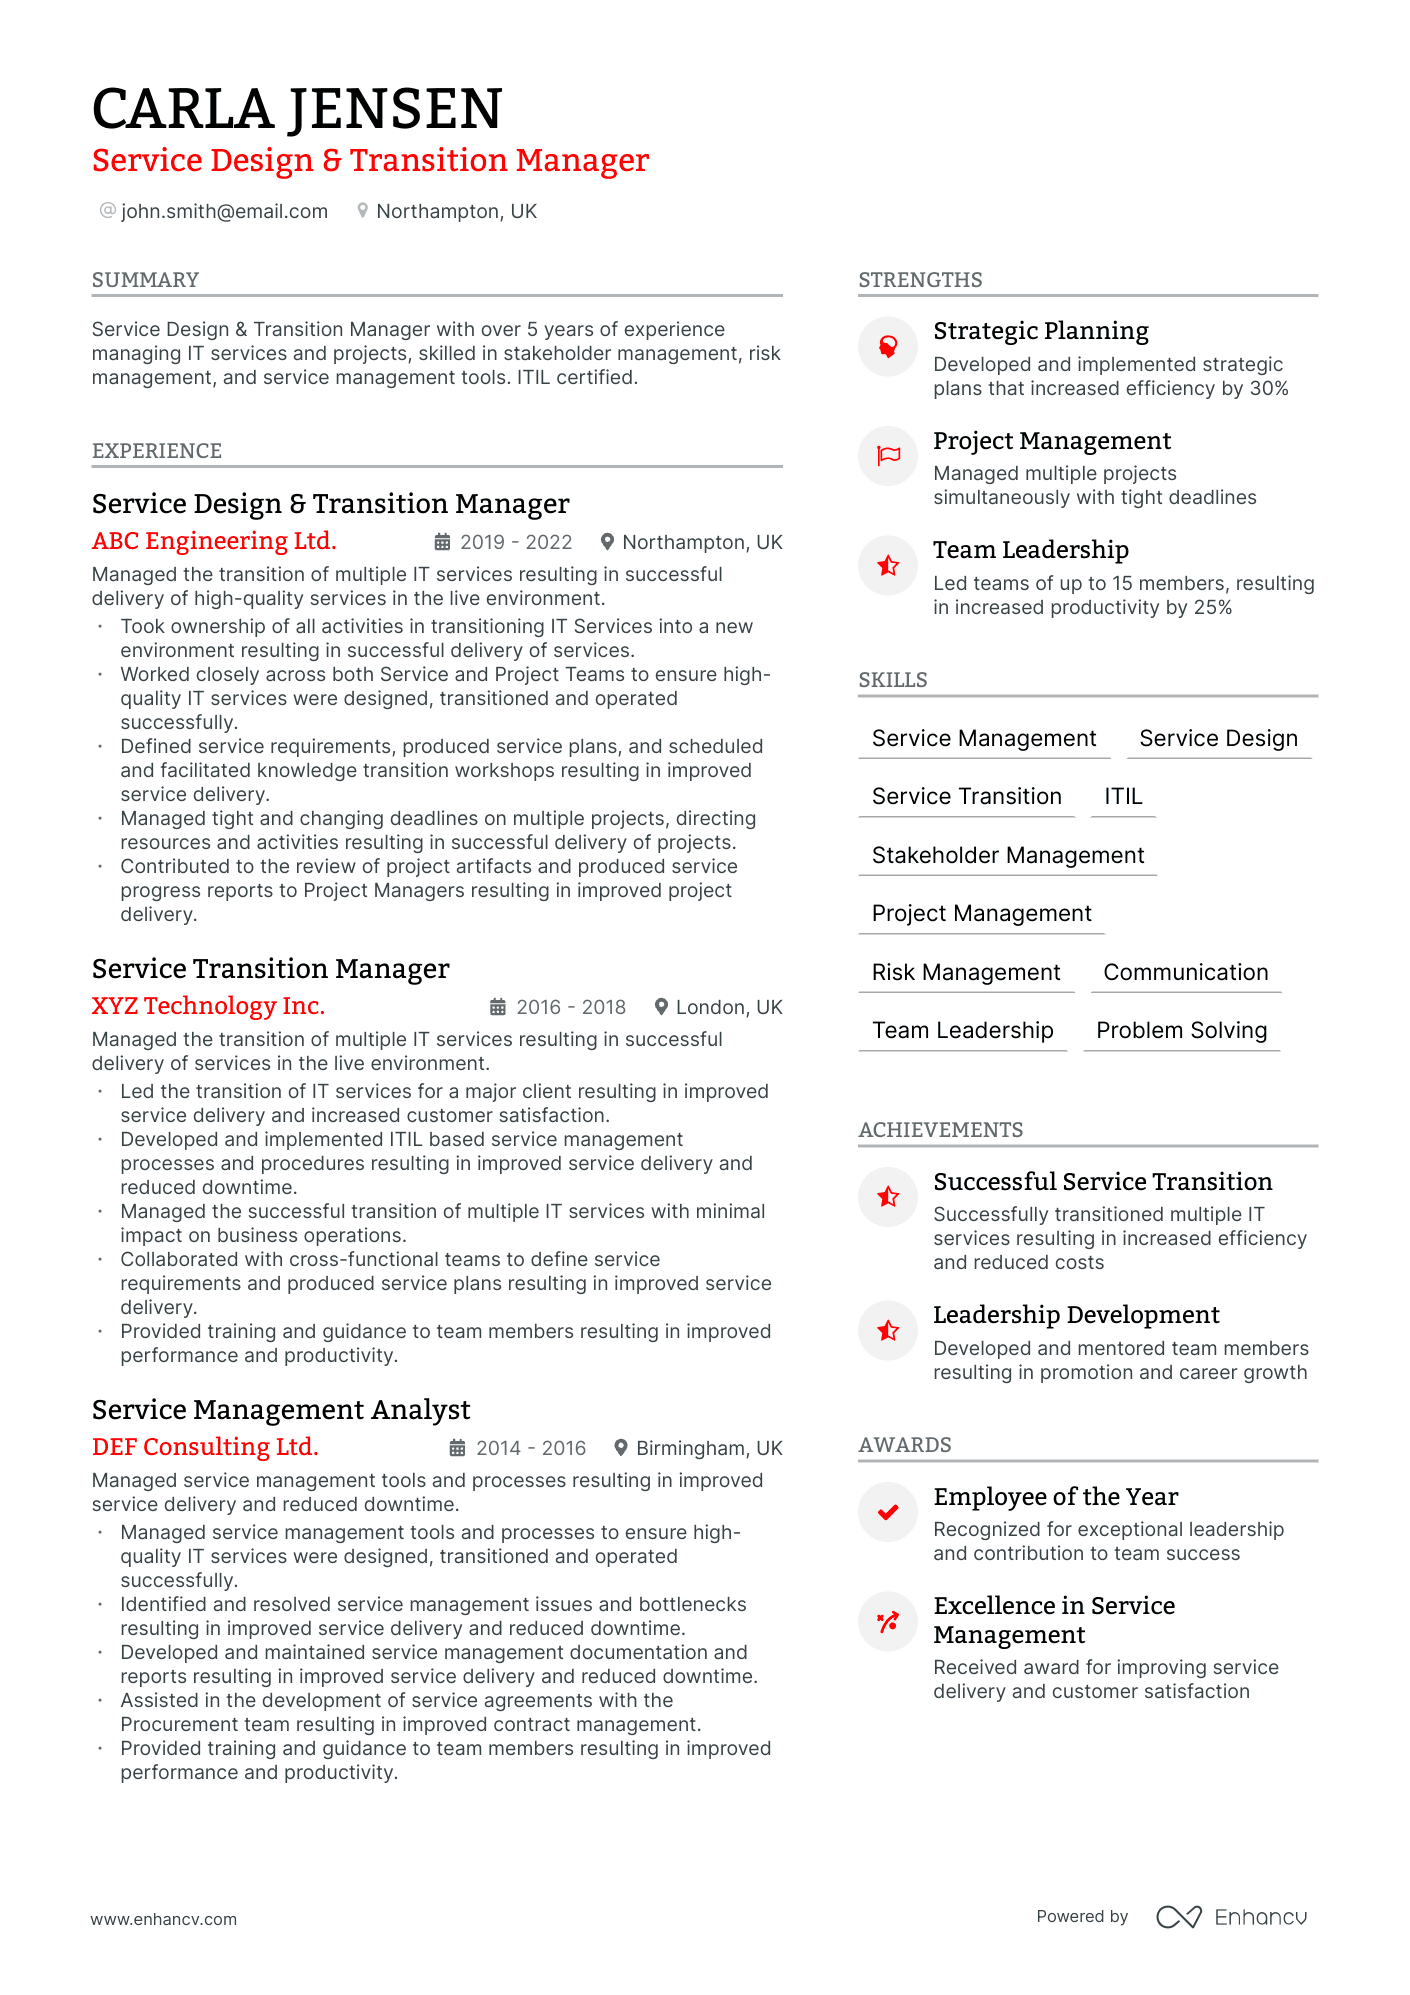 Transition Manager resume example